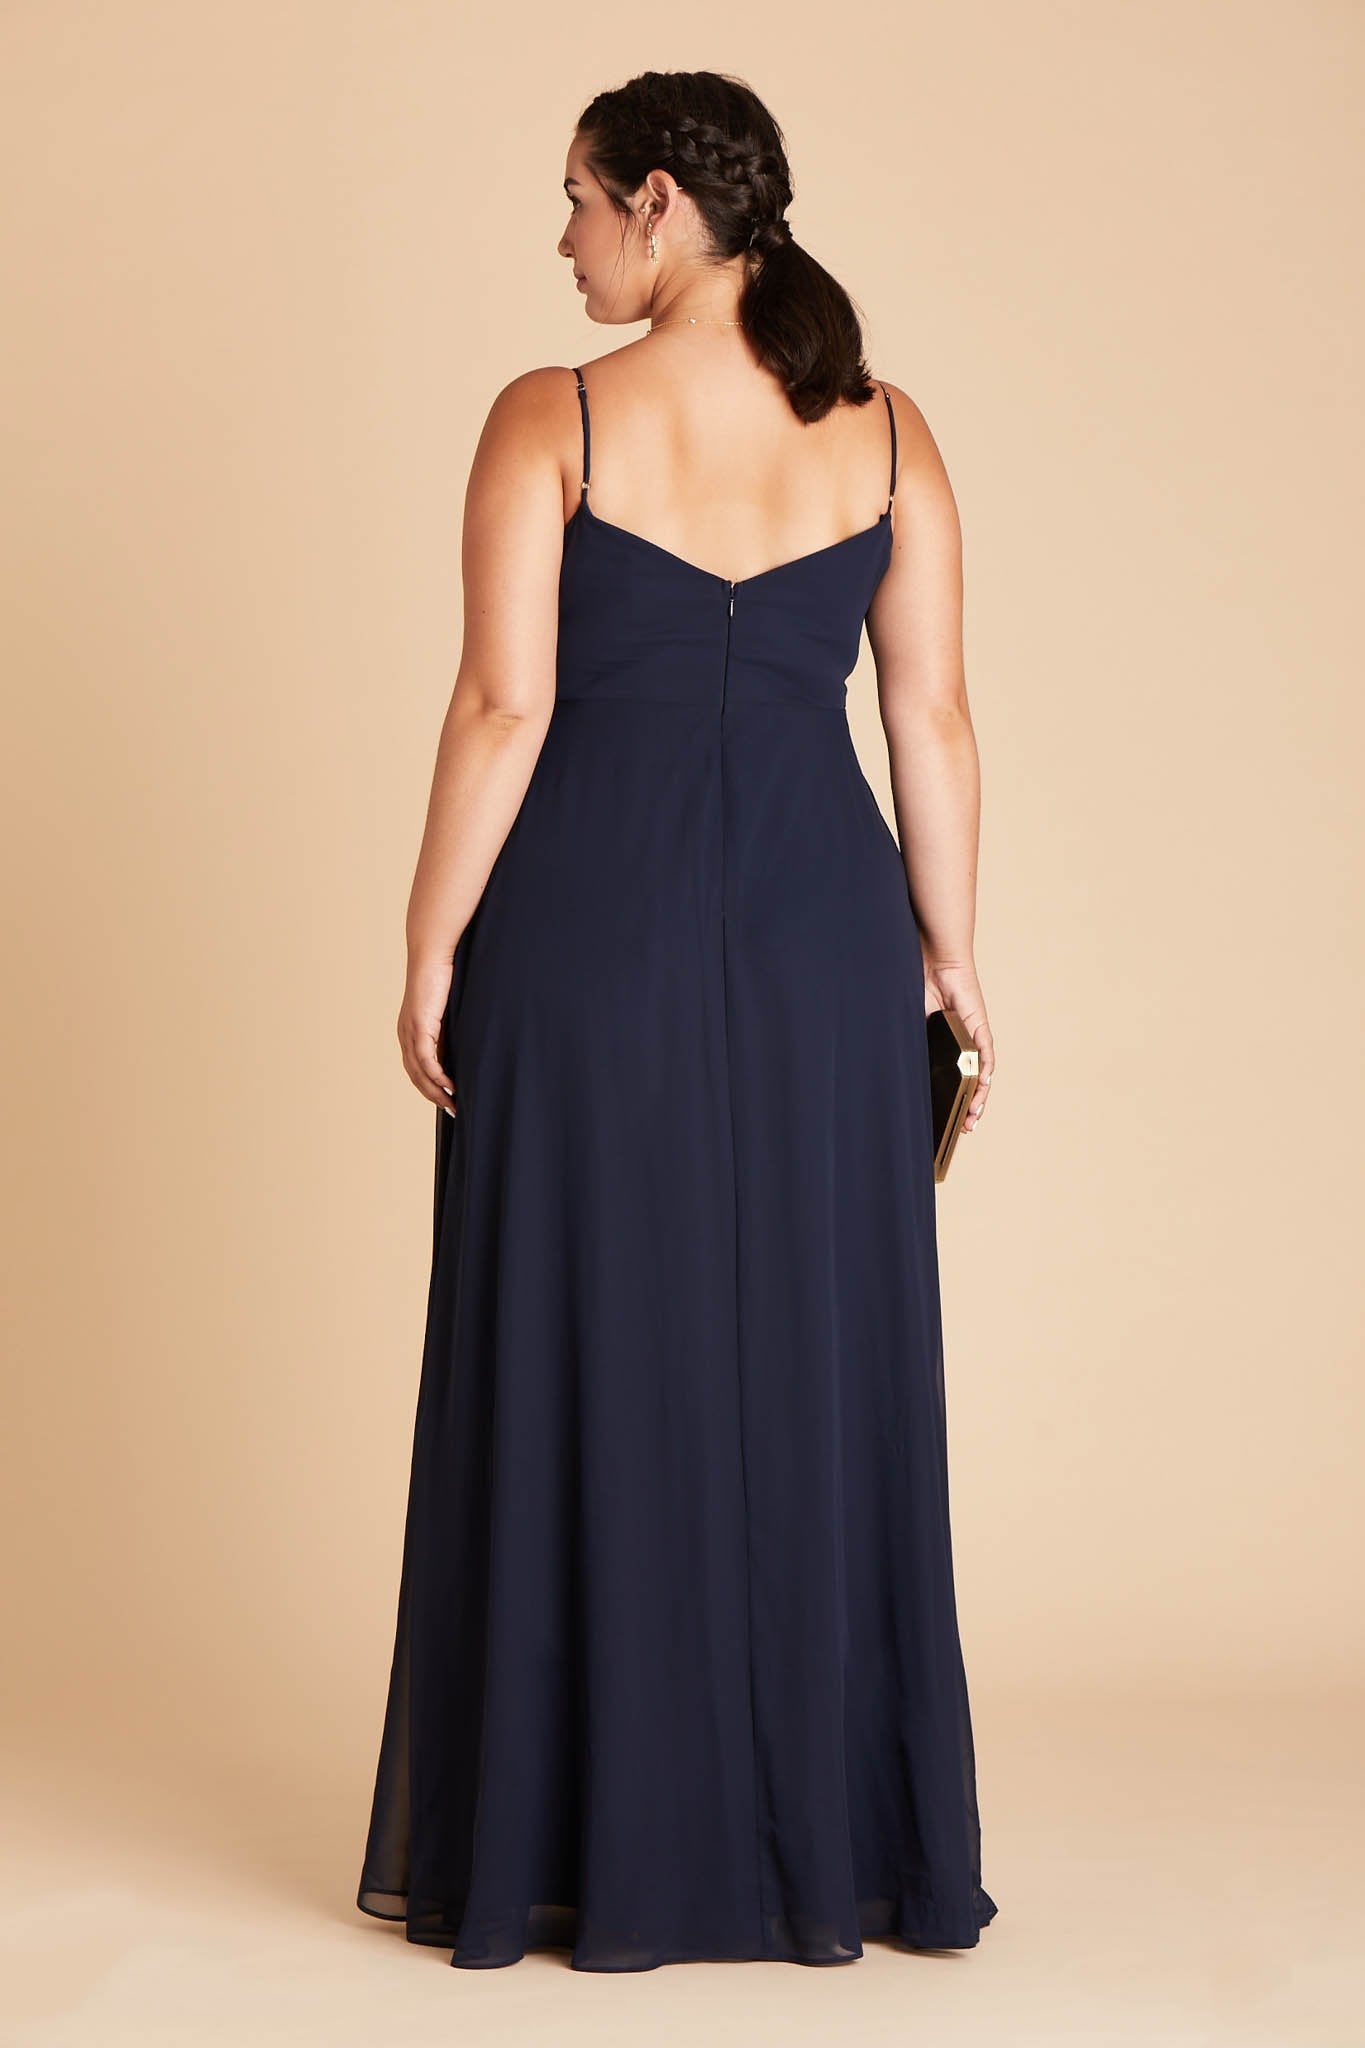 Devin convertible plus size bridesmaids dress in navy blue chiffon by Birdy Grey, back view